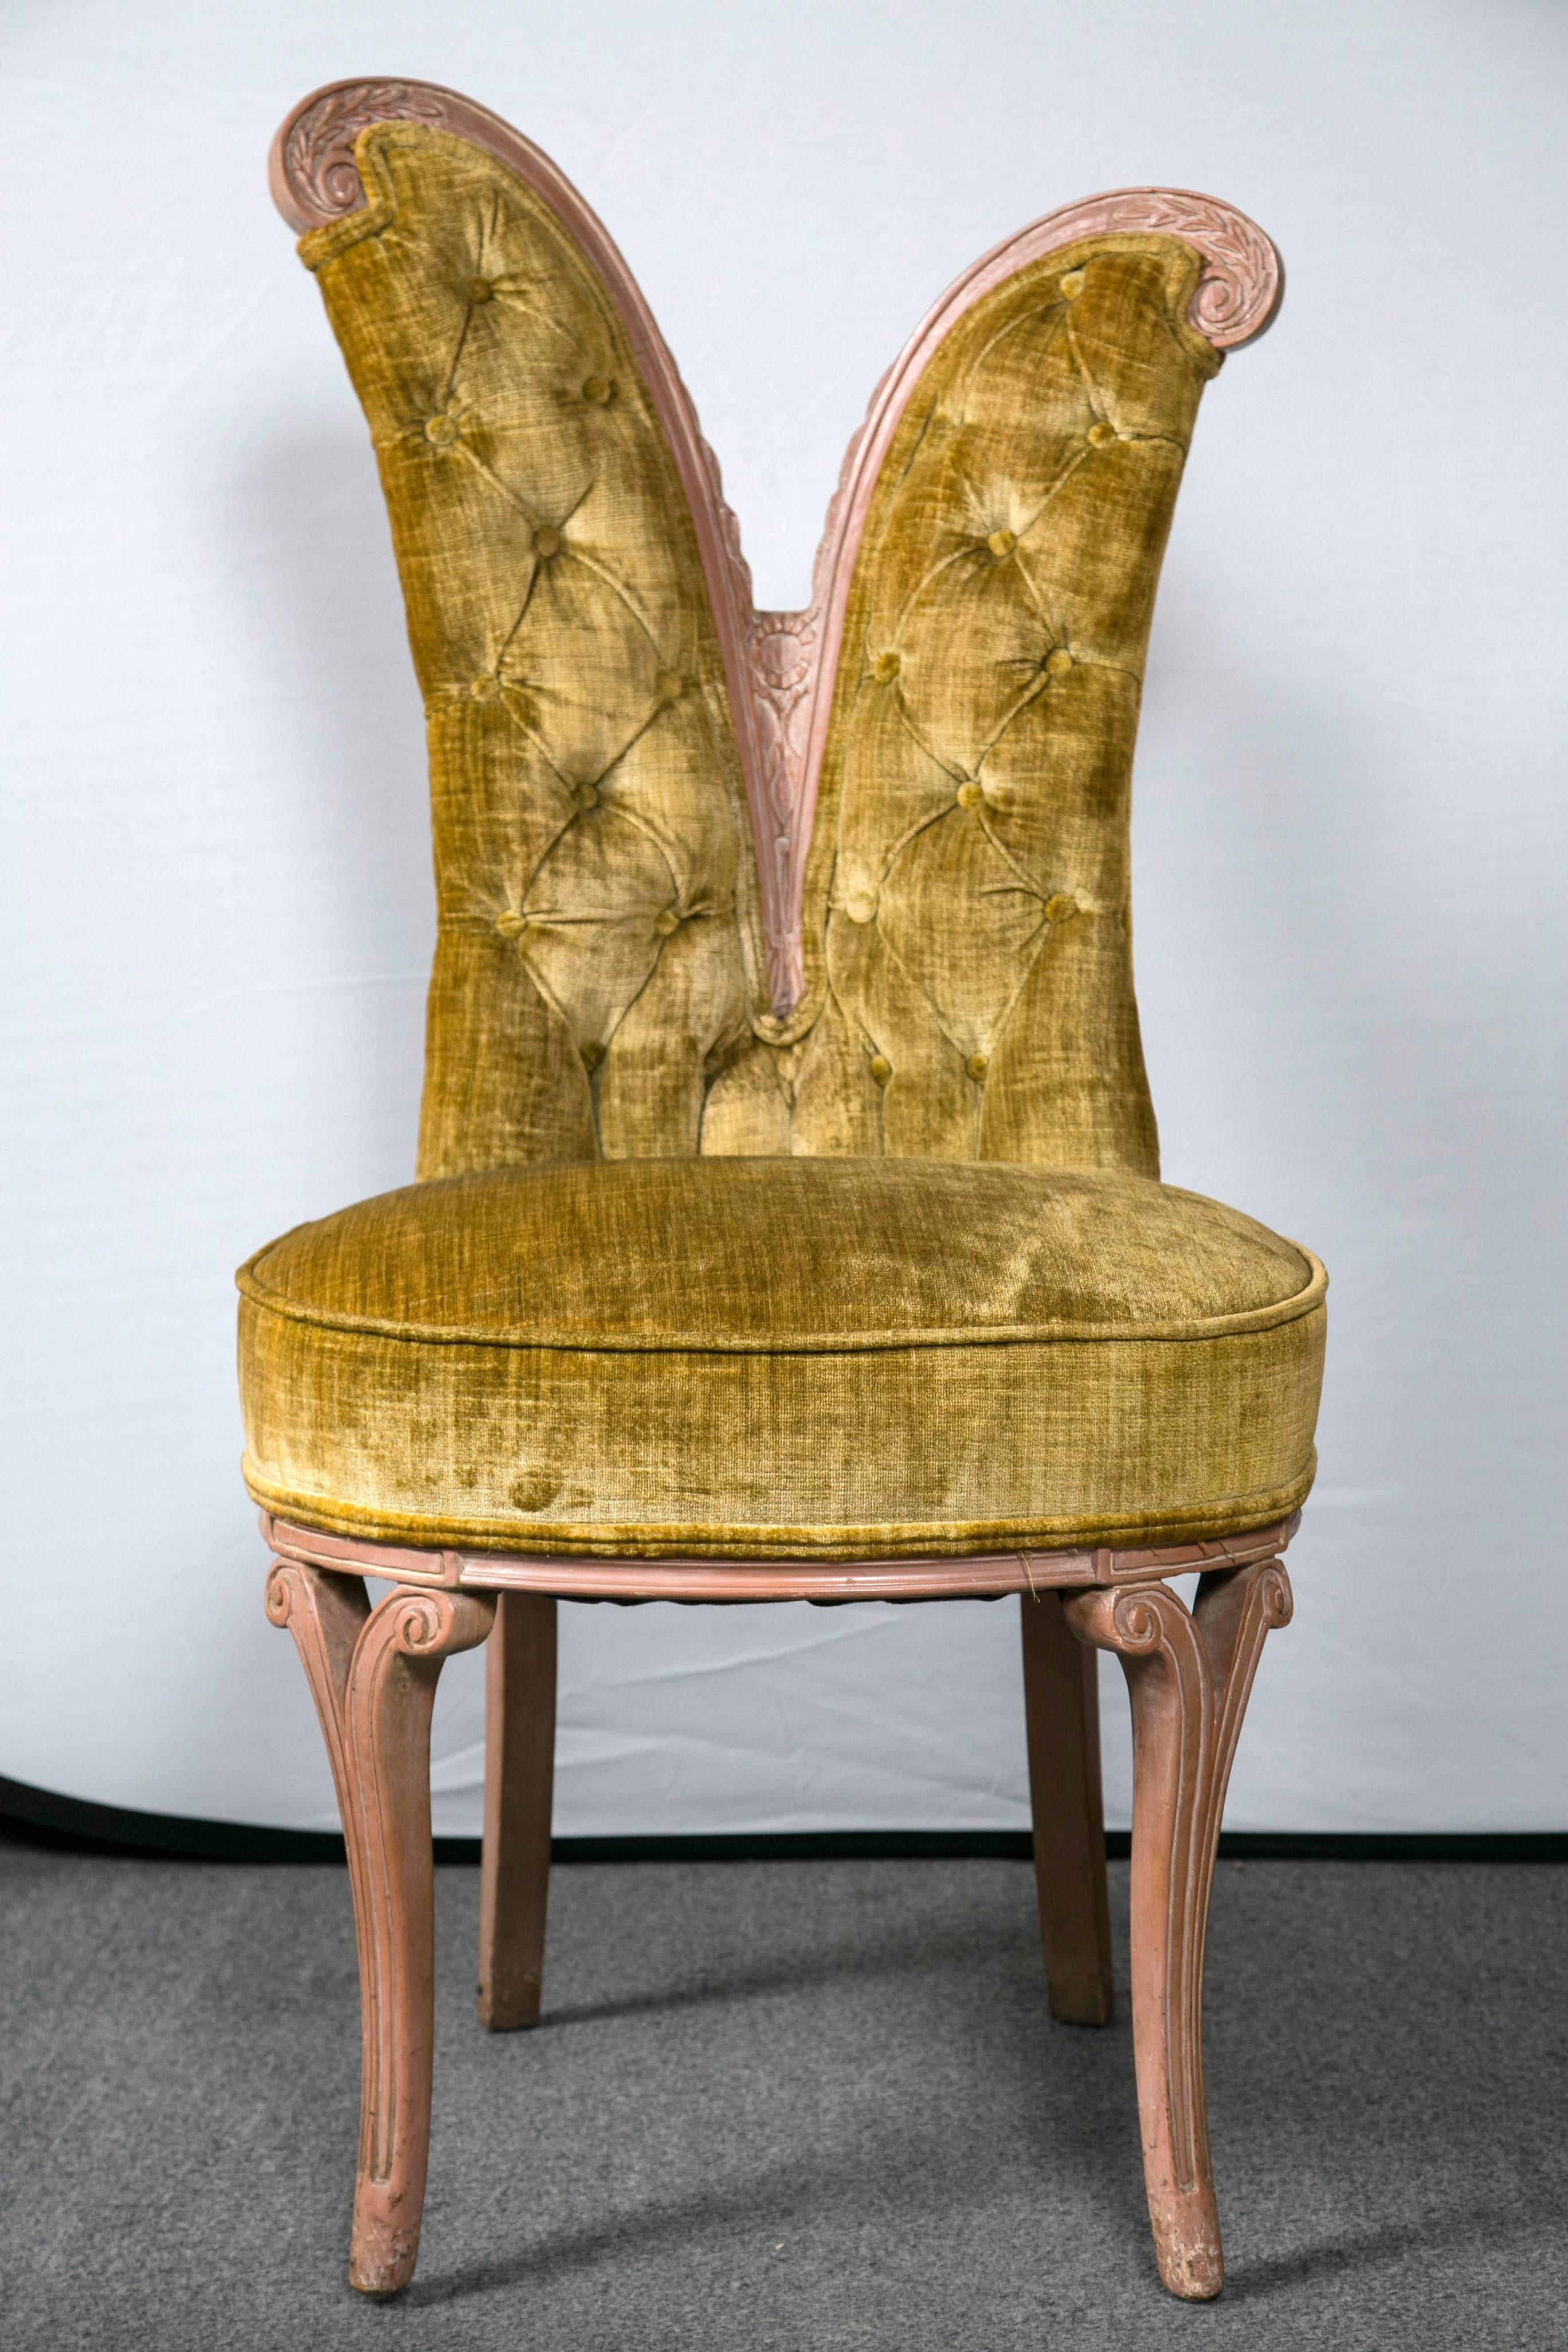 Pair of Art Deco style feather decorated side chairs. Fabulous style with many curves and carved details. Tufted back would be wonderful with a great funky/modern upholstery as side chairs or piano chair any place in the home would add a statement.